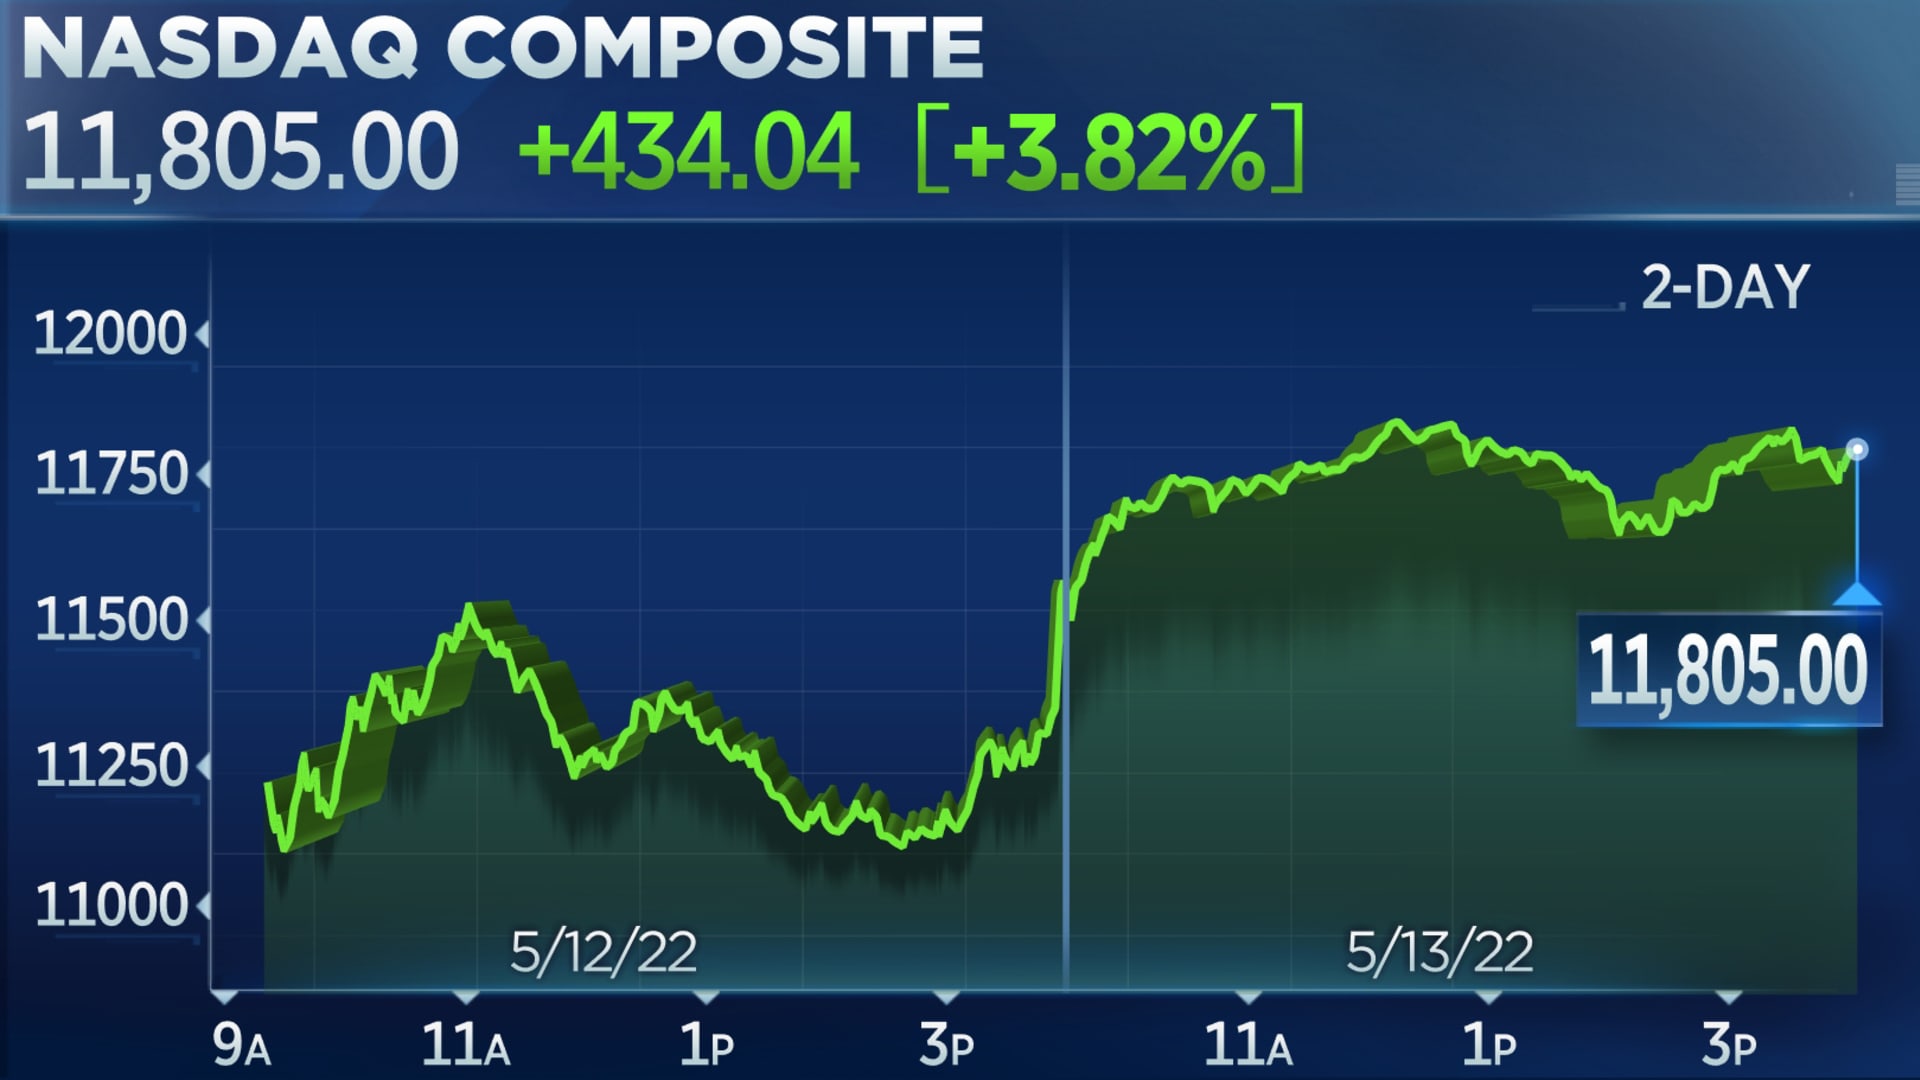 Nasdaq pops 3% Dow jumps 400 points in comeback rally following steep losses earlier in the week – CNBC